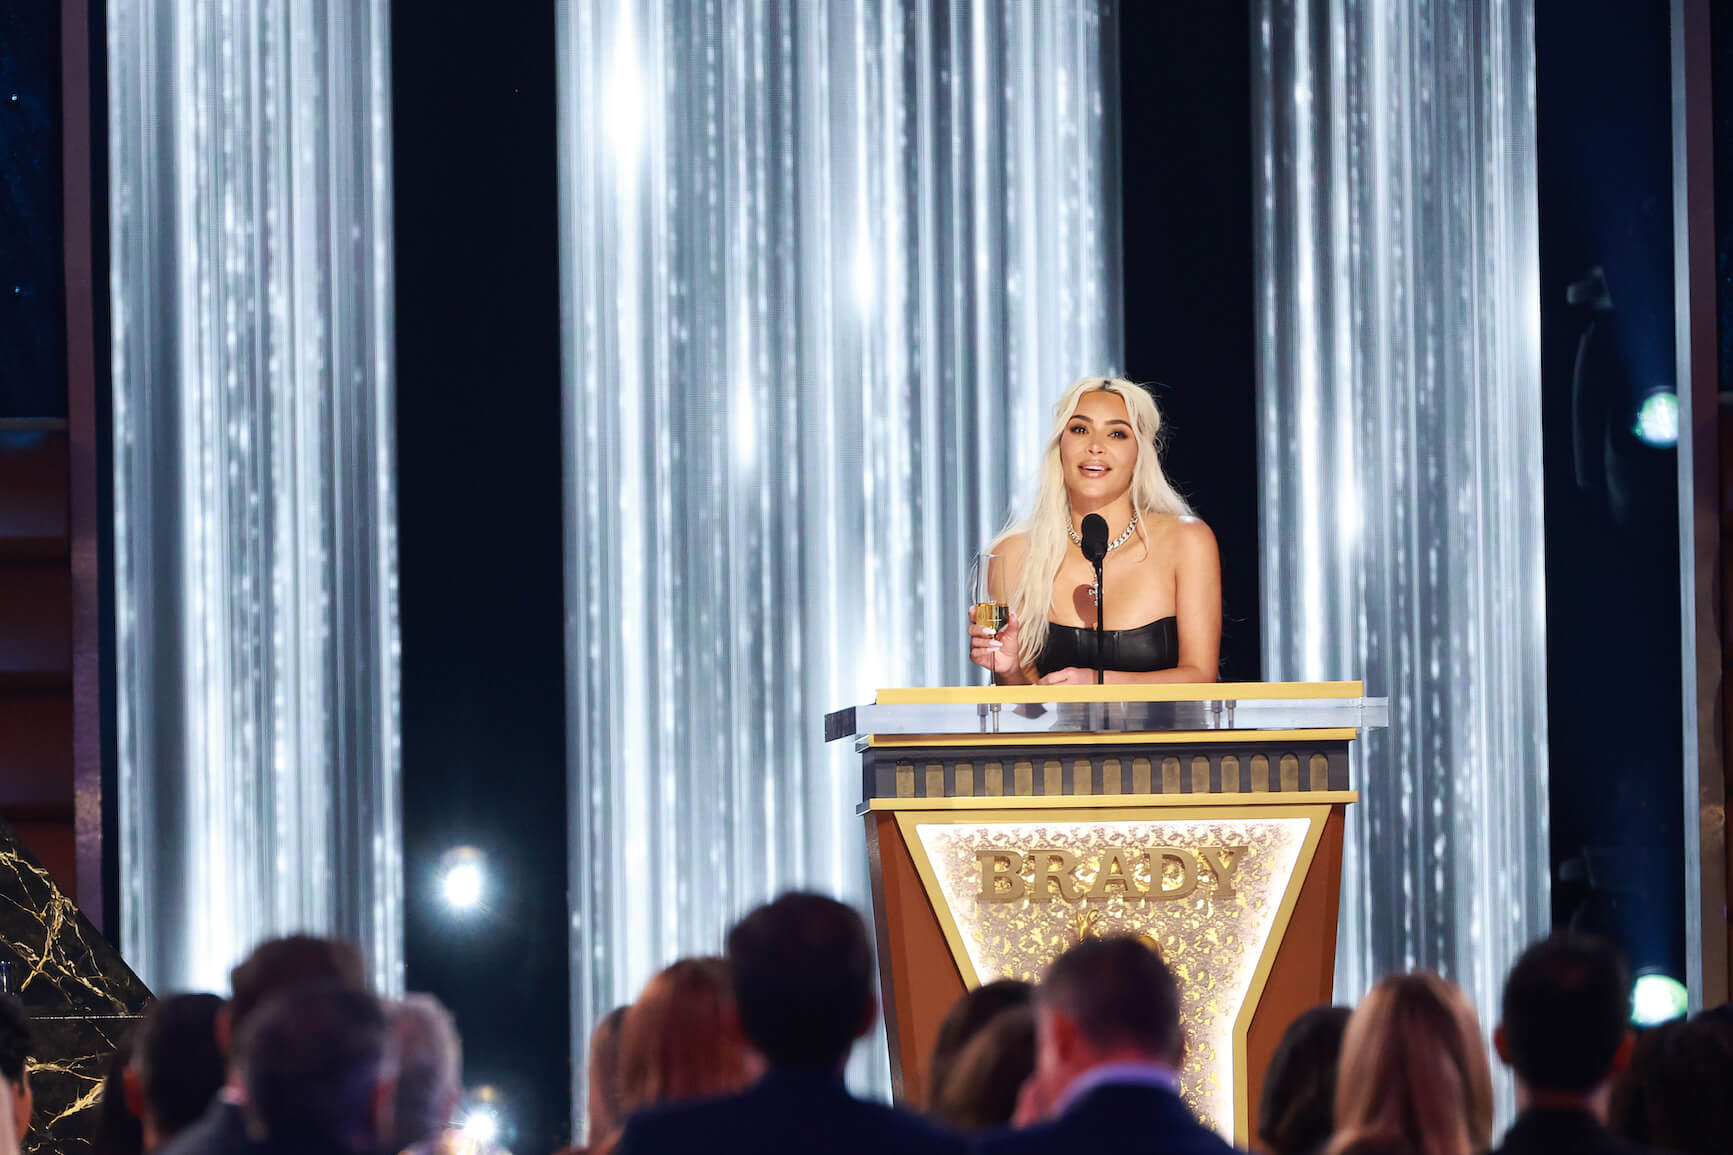 Kim Kardashian standing at a gold podium with the word "Brady" on it in front of a crowd for 'The Roast of Tom Brady'